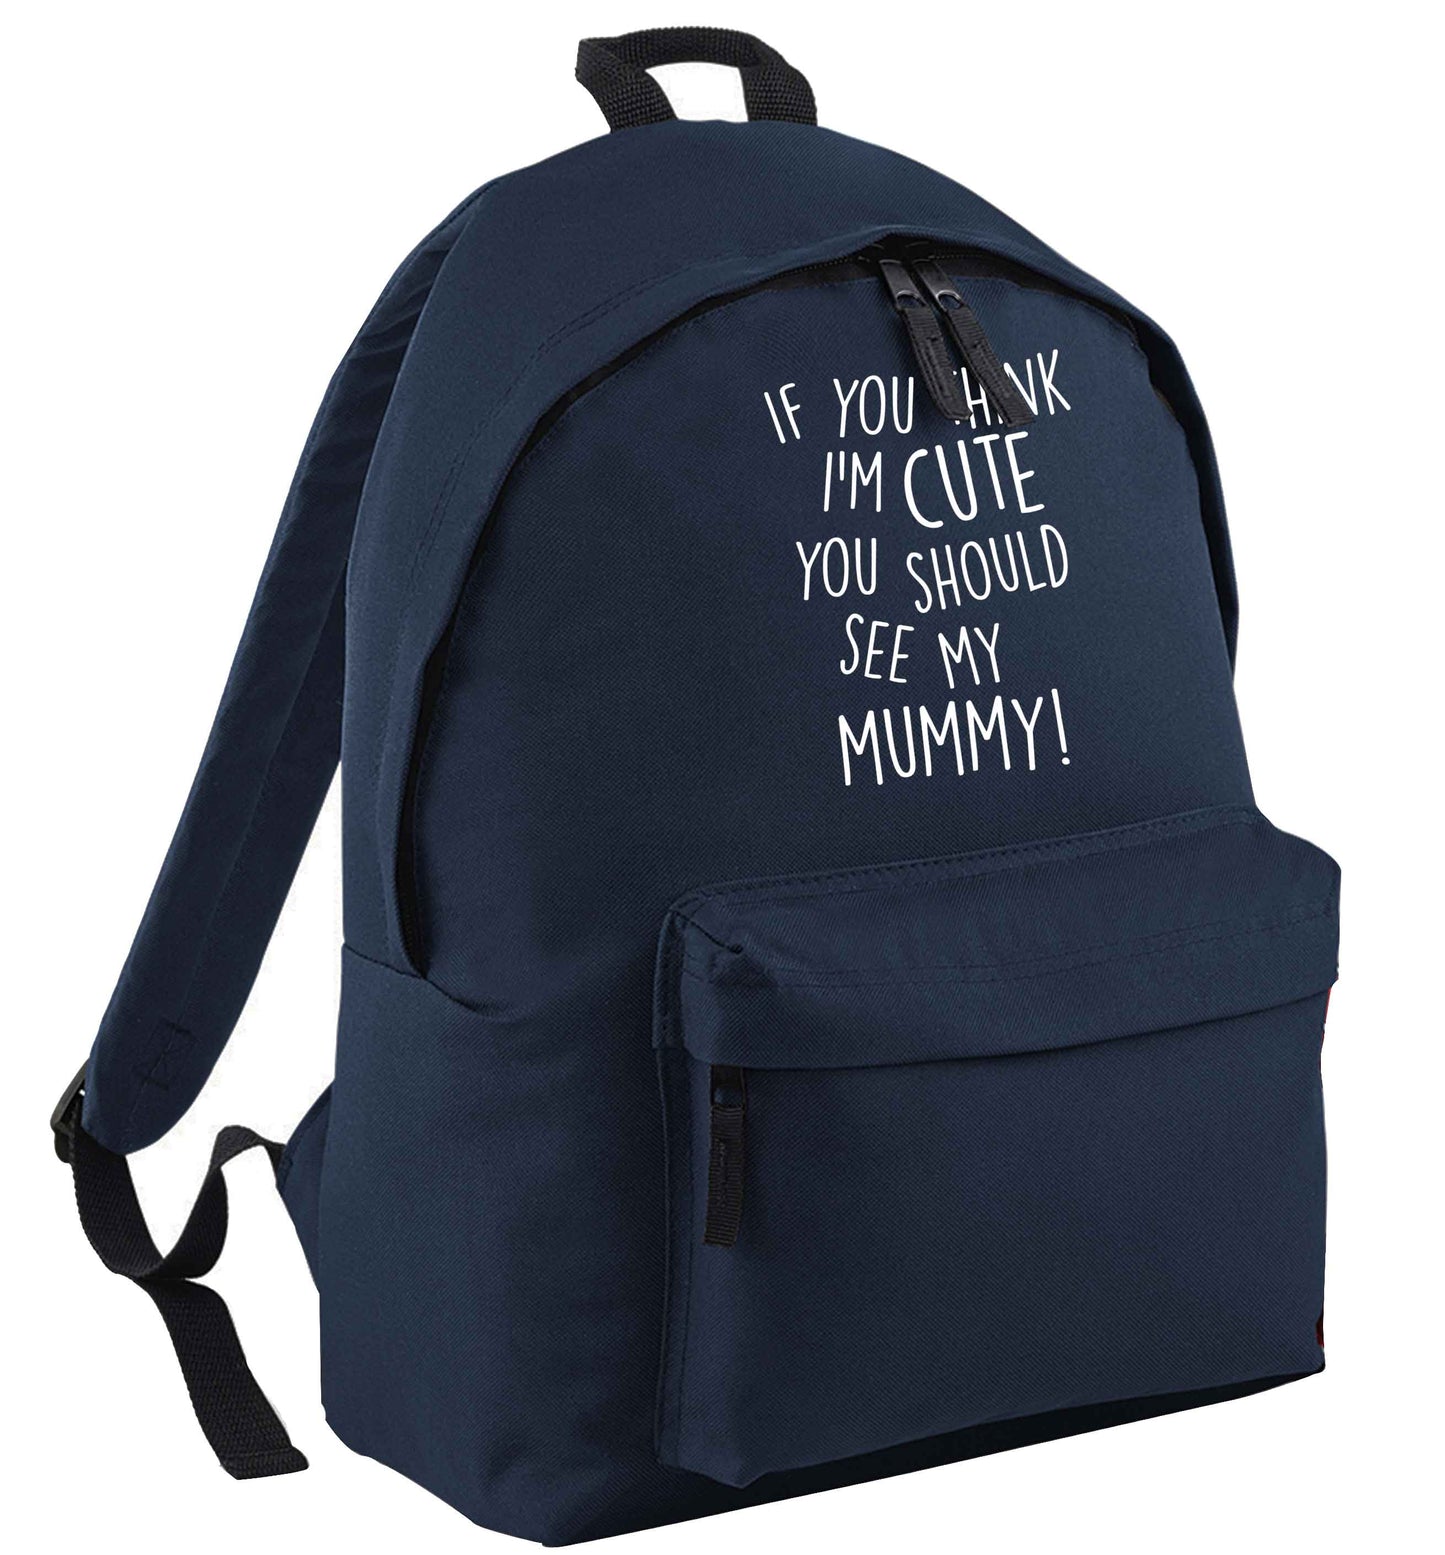 If you think I'm cute you should see my mummy navy childrens backpack